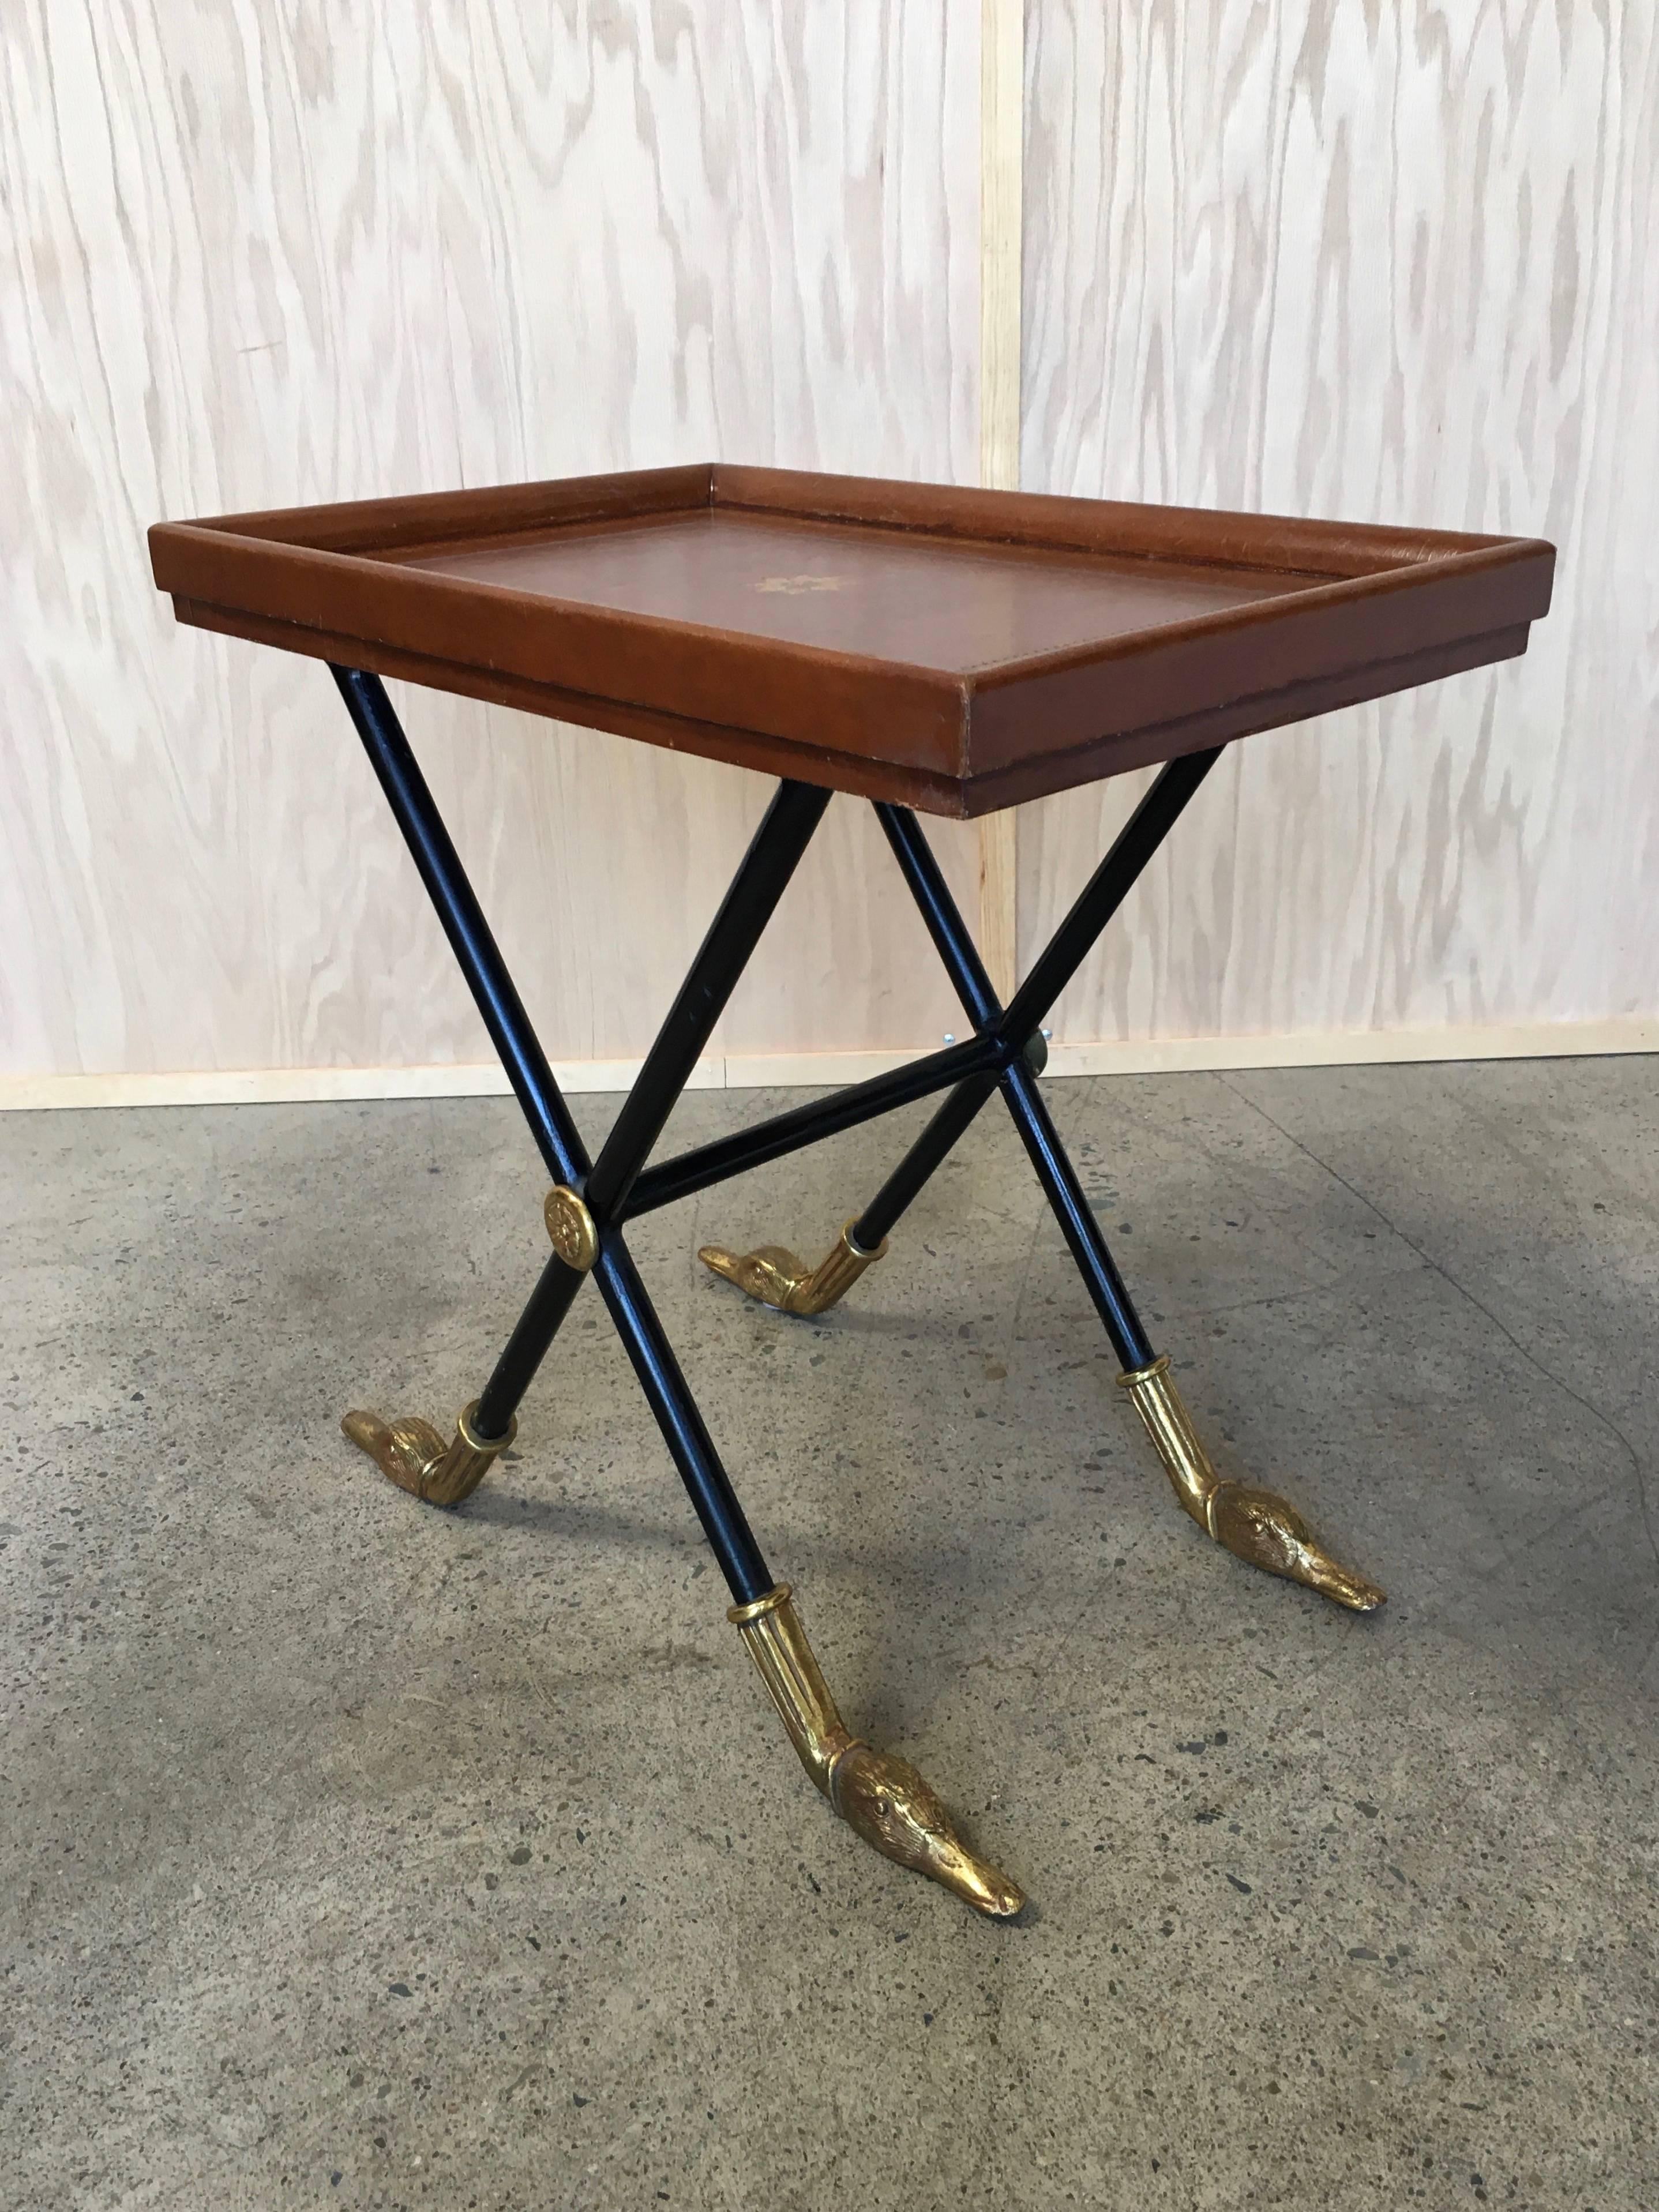 Maitland Smith side Table with distressed leather and brass accents with duck head for feet.